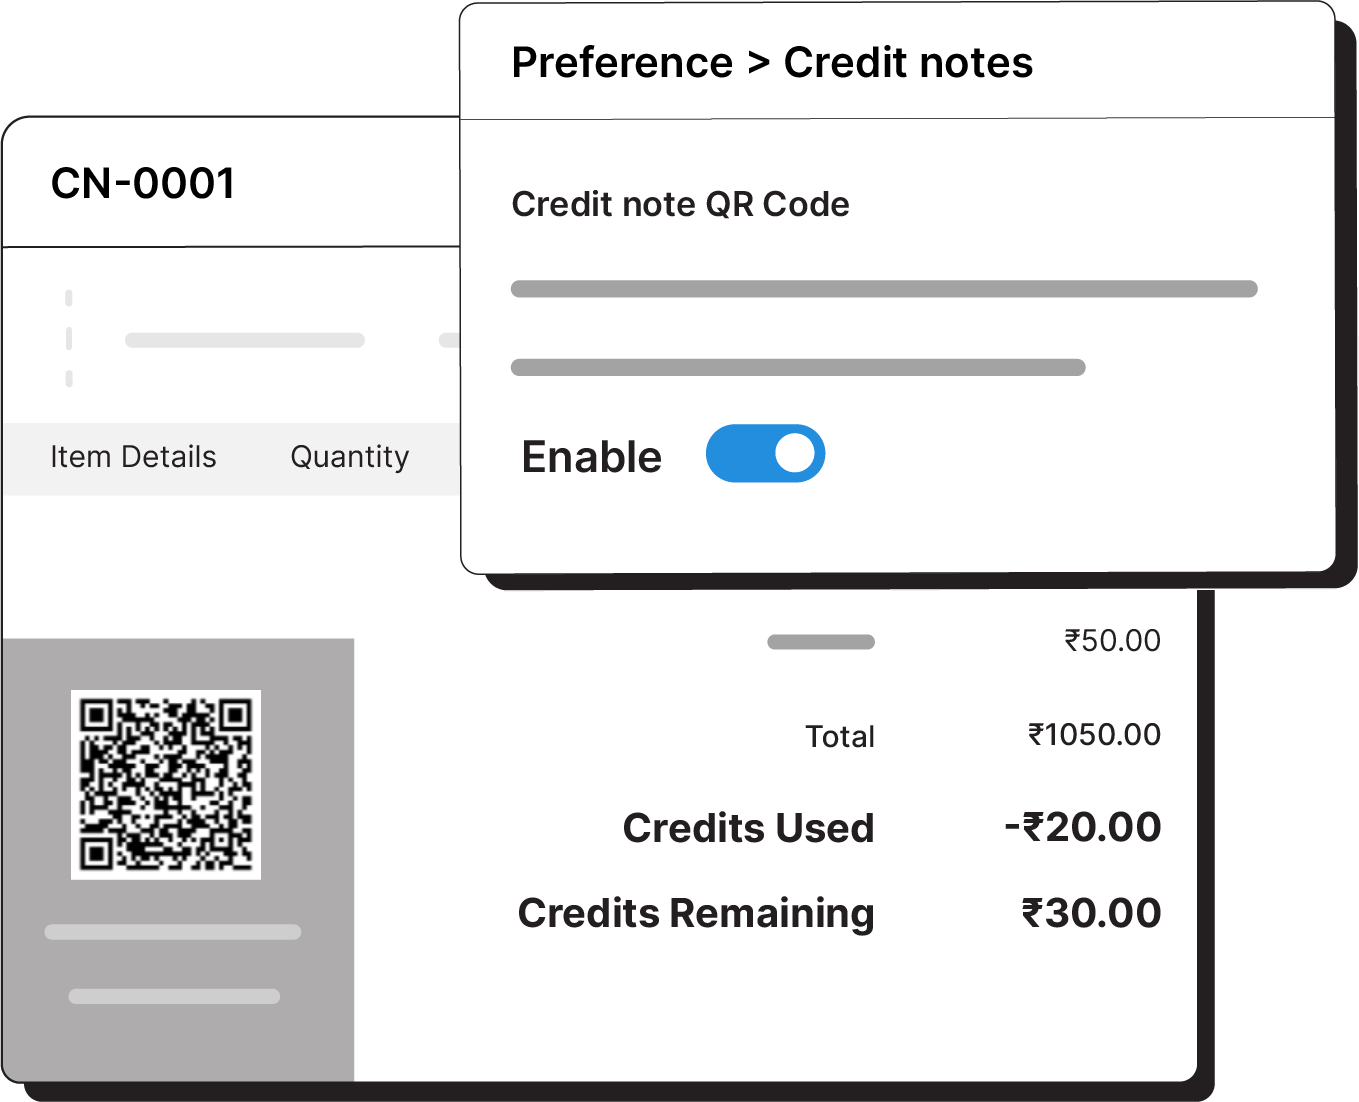 Generate QR codes for credit notes